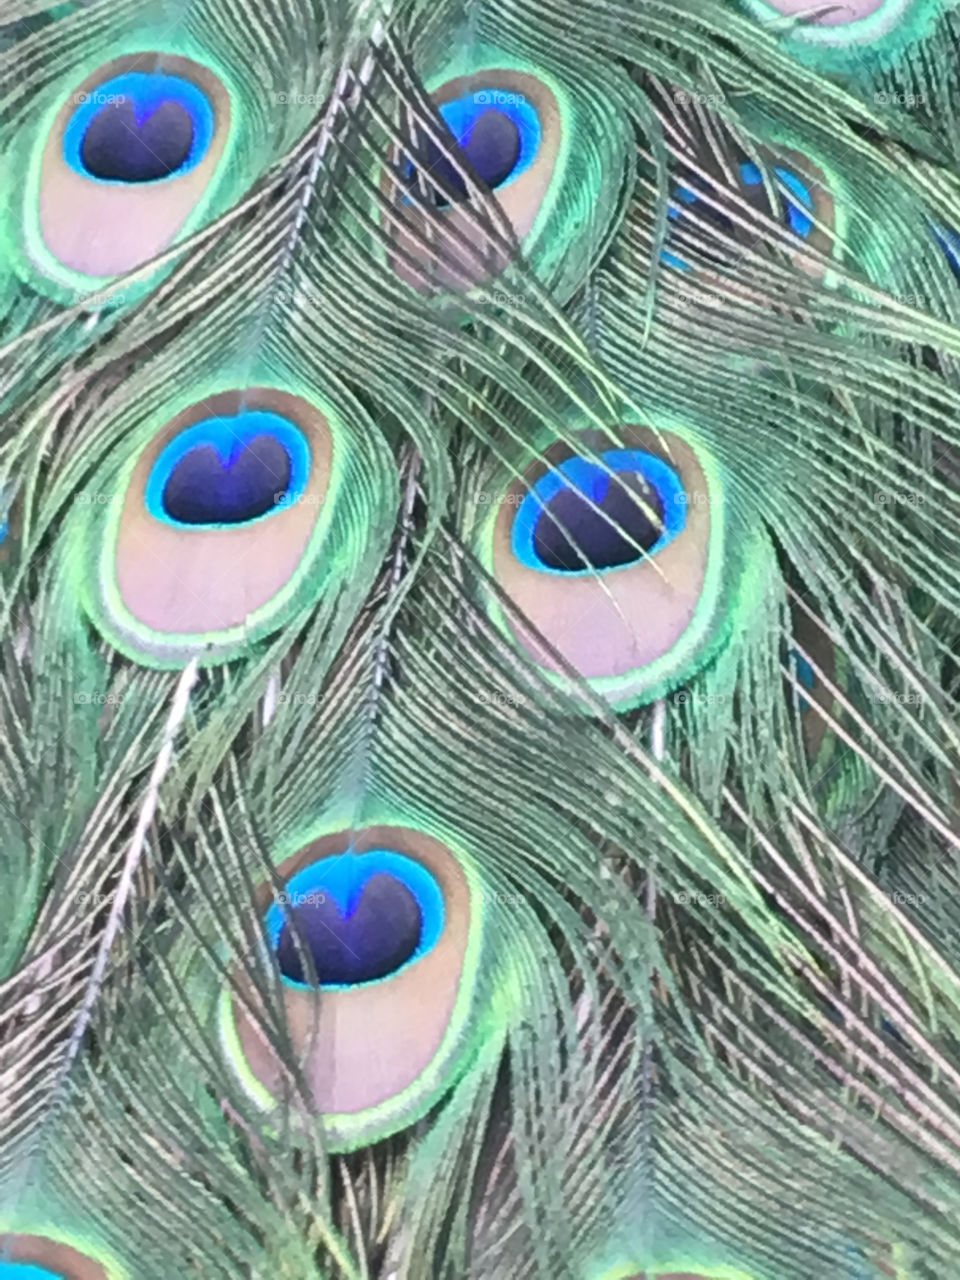 Peacock feathers up close-Mexico